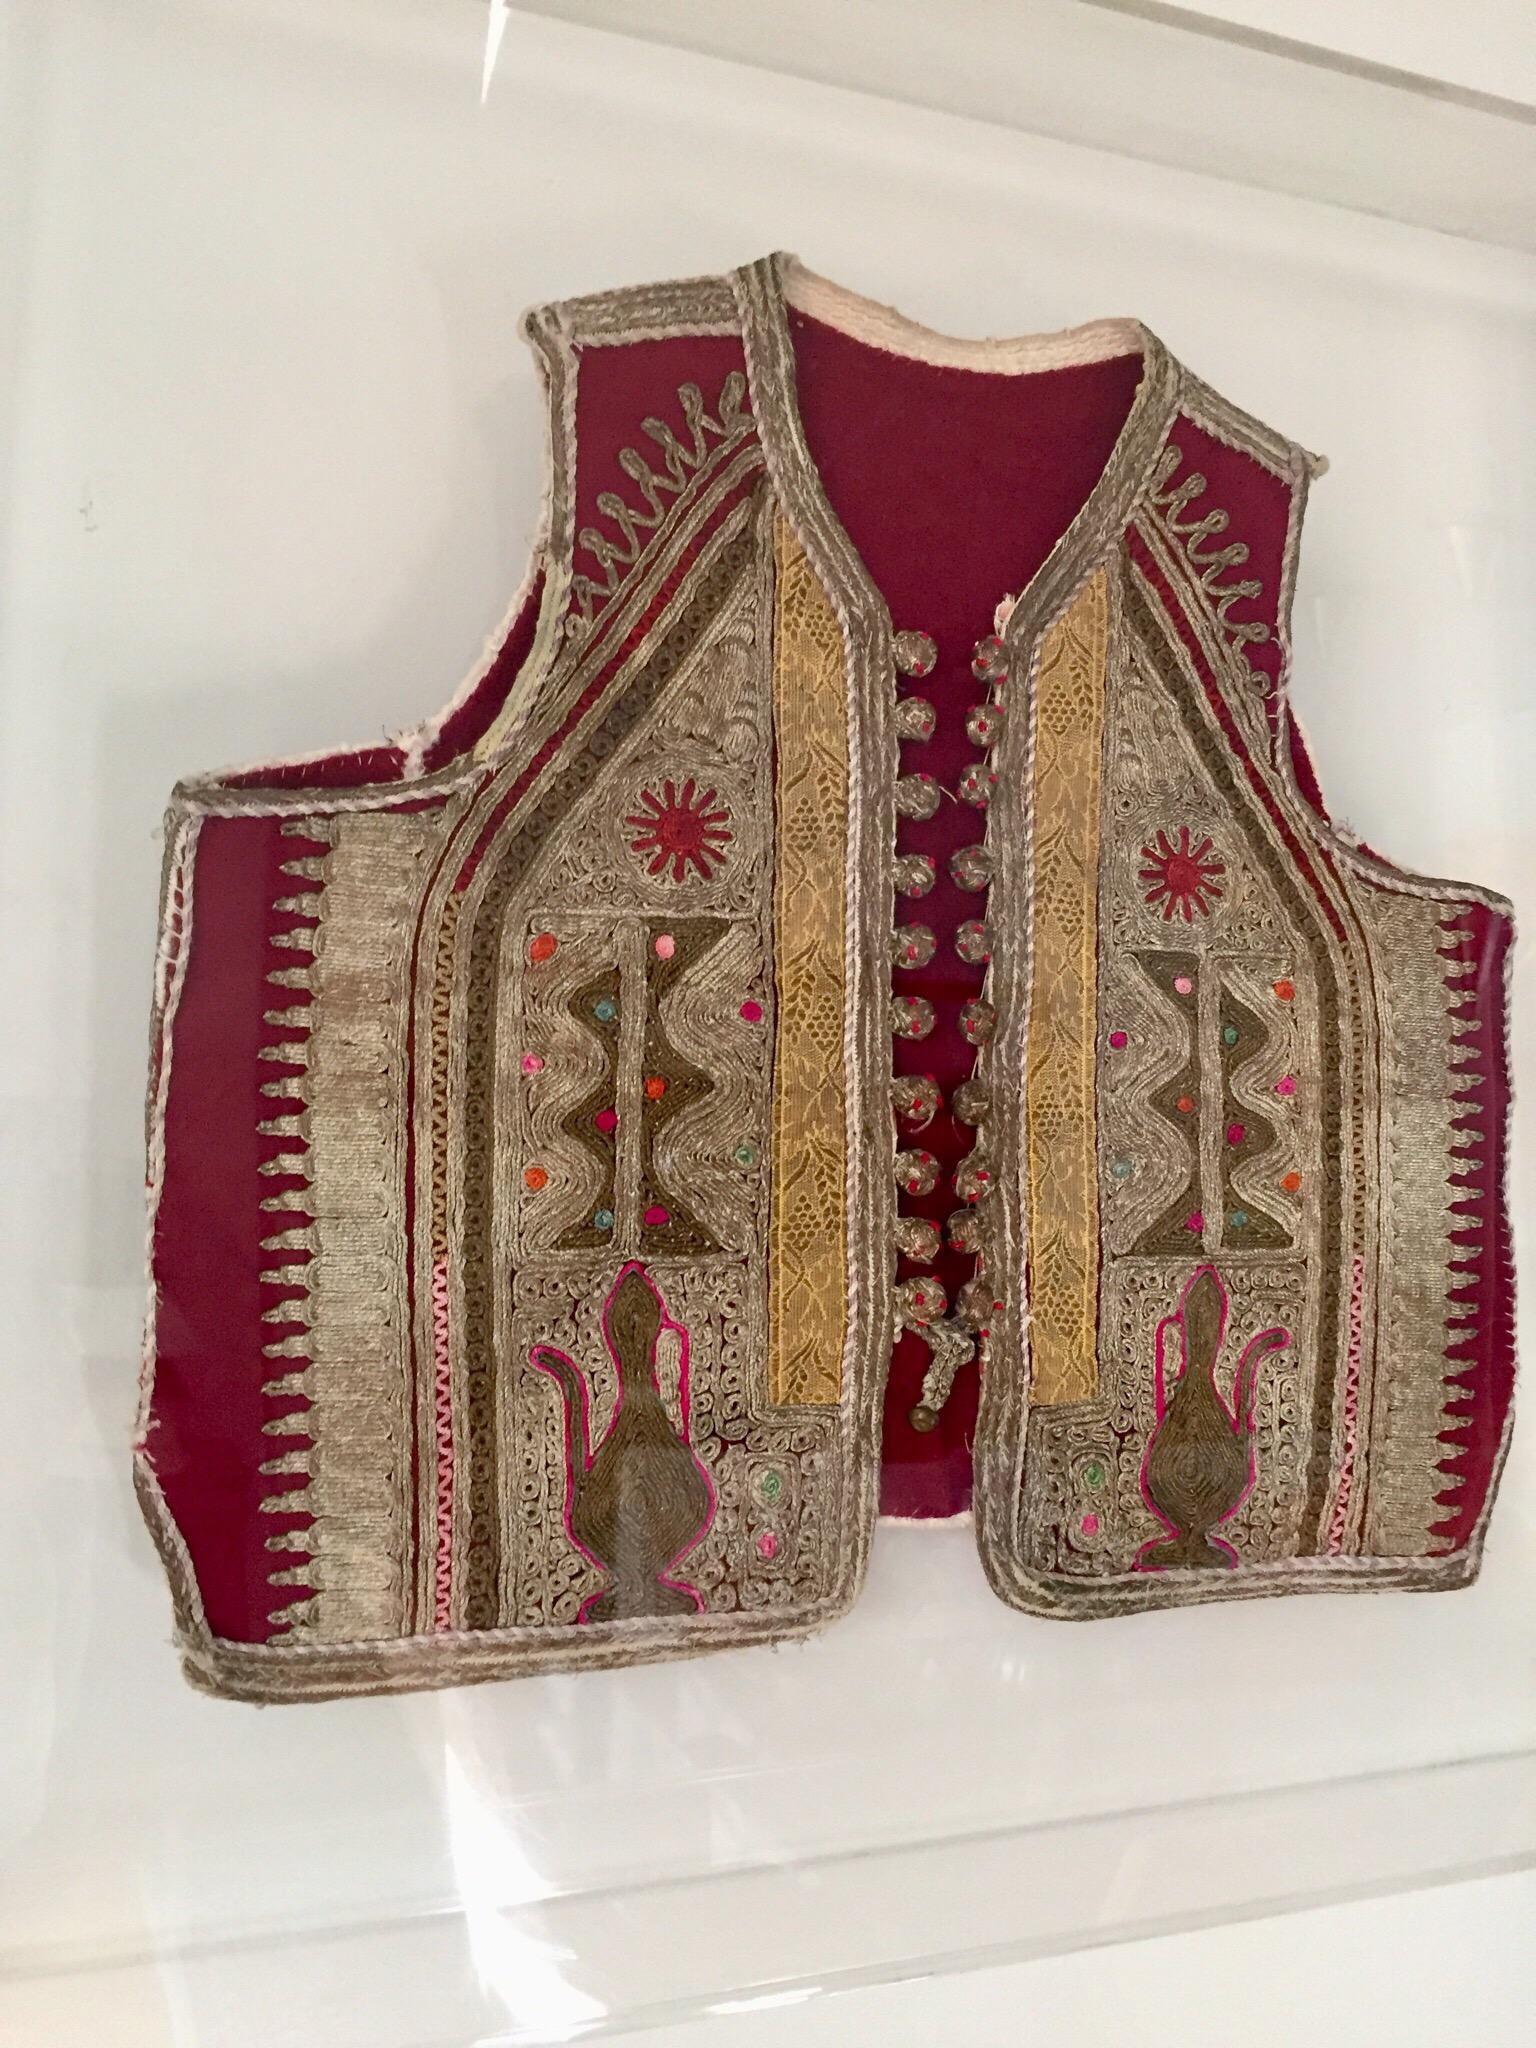 Hand-Crafted 19th Century Antique Ottoman Embroidered Vest Framed in a Lucite Box